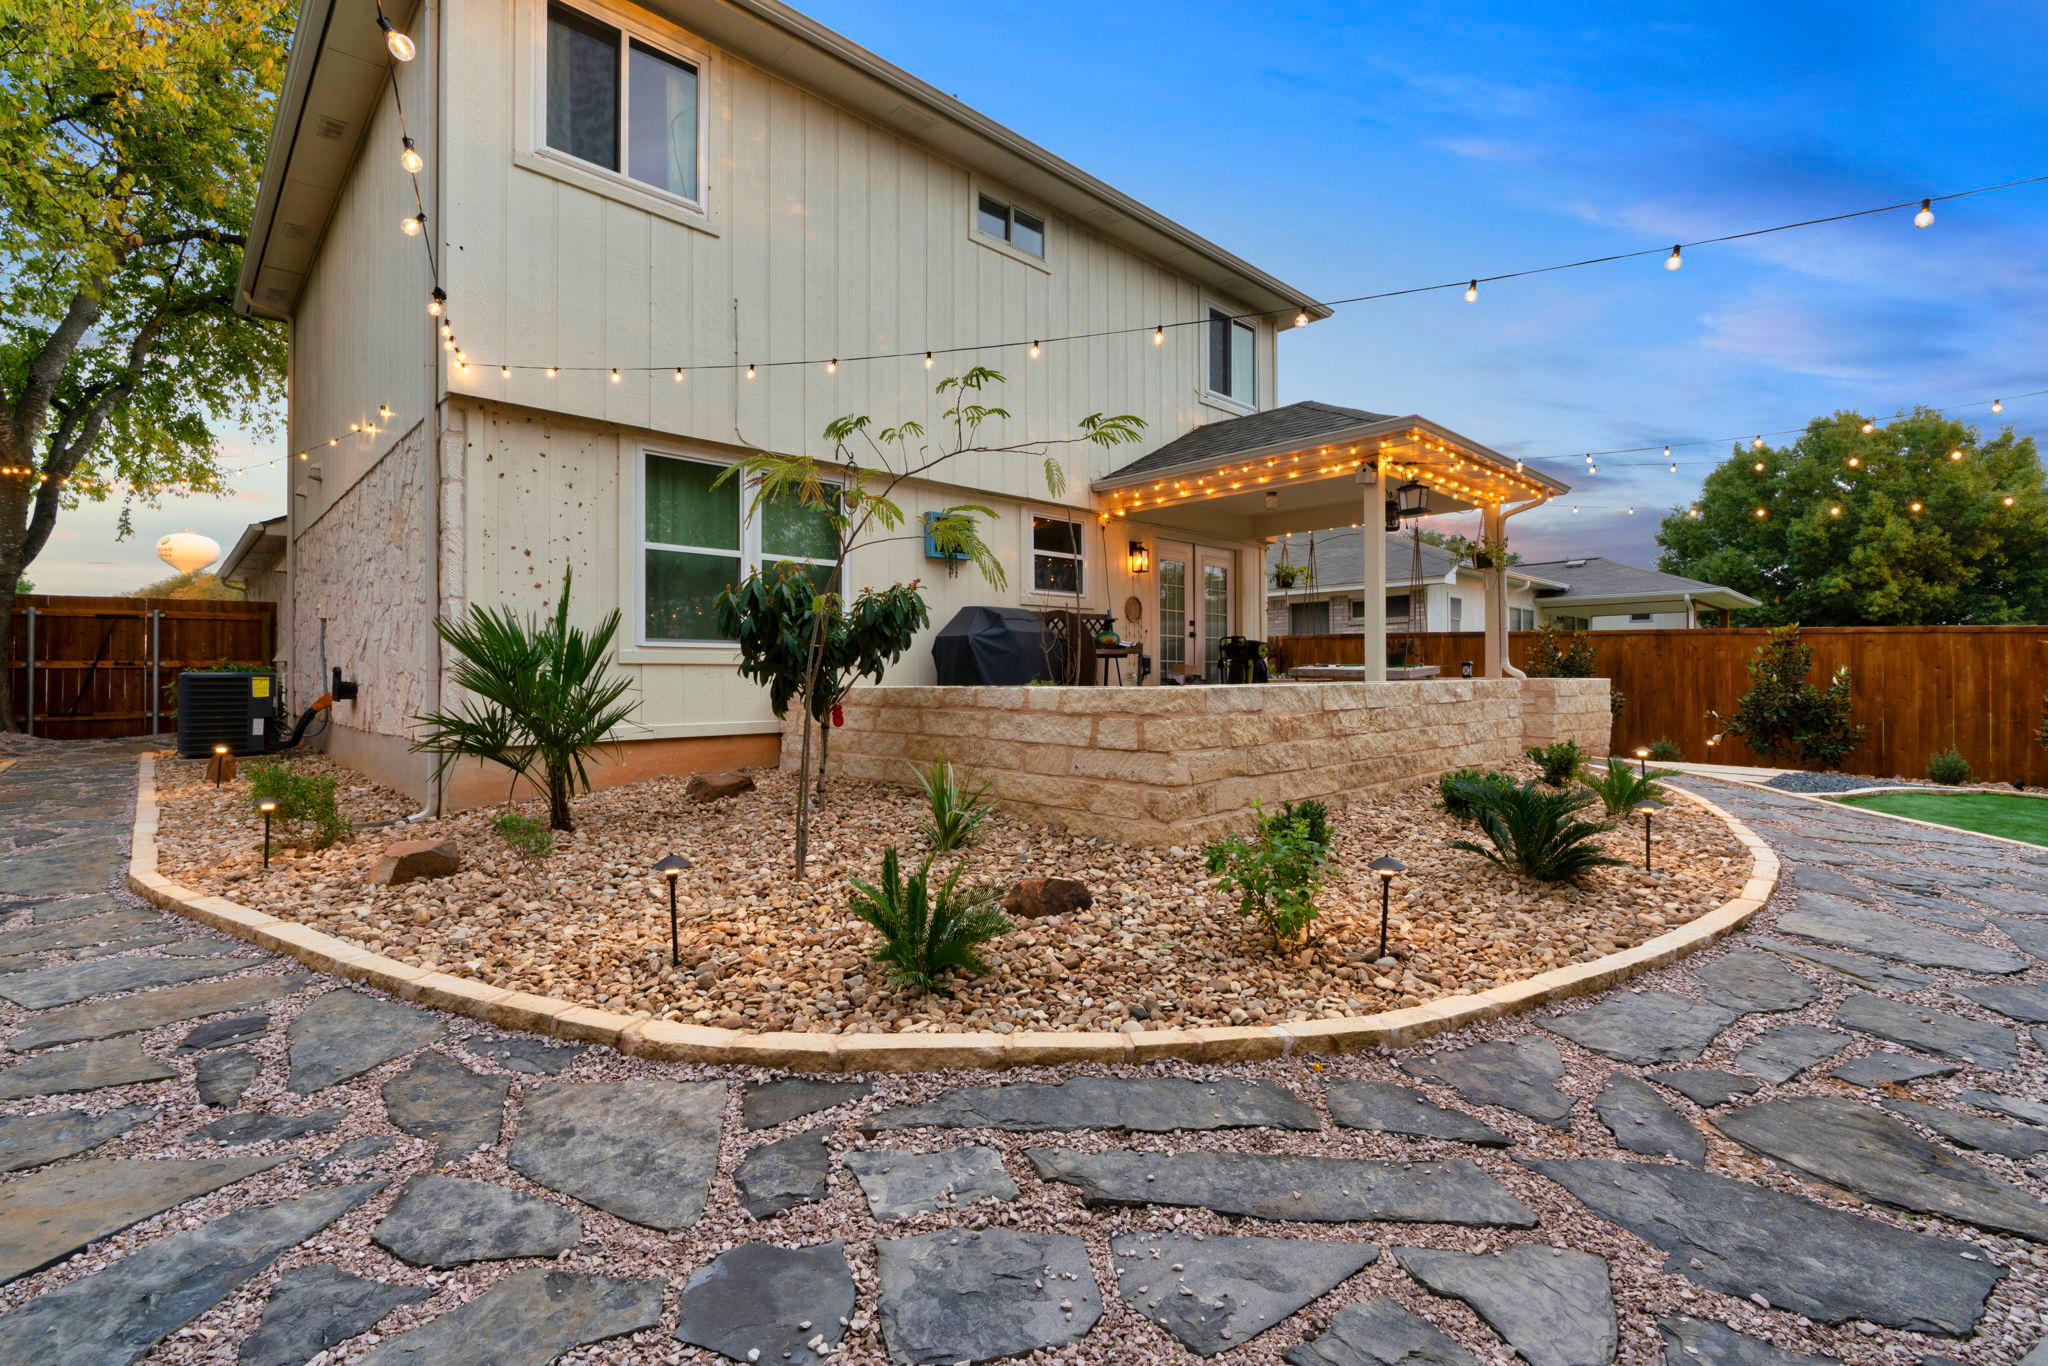 Hardscaping is a broad term for any inorganic materials used to enhance your property and add functionality it may have been missing before.